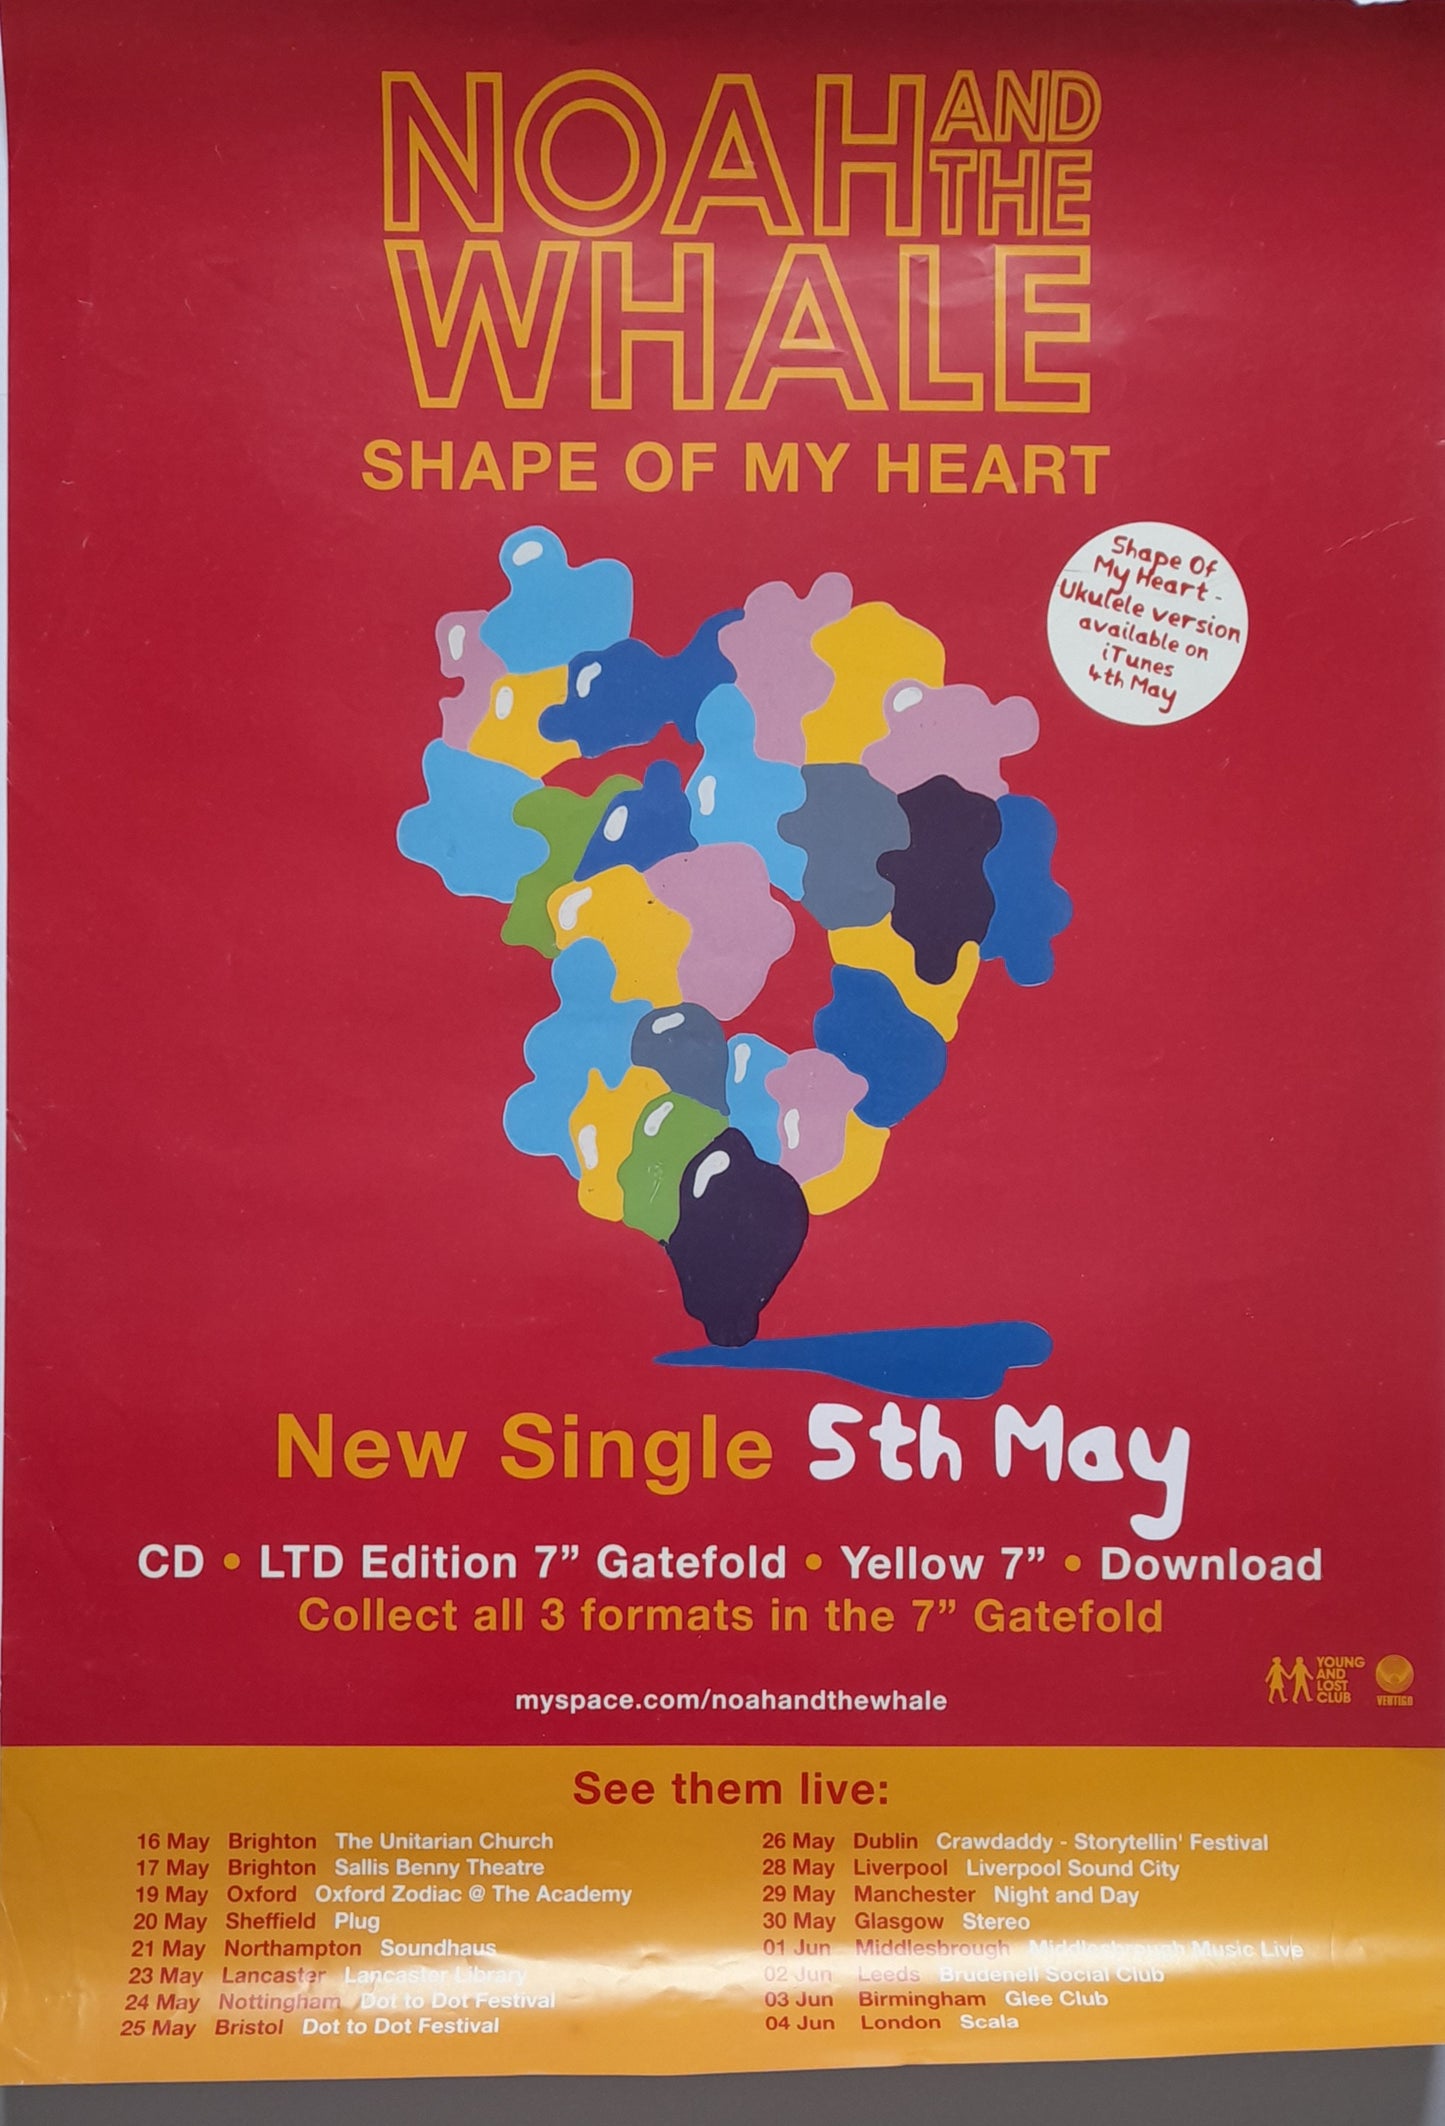 Noah and the Whale Shape of my Heart single Promotional Poster - RewindPressPlay